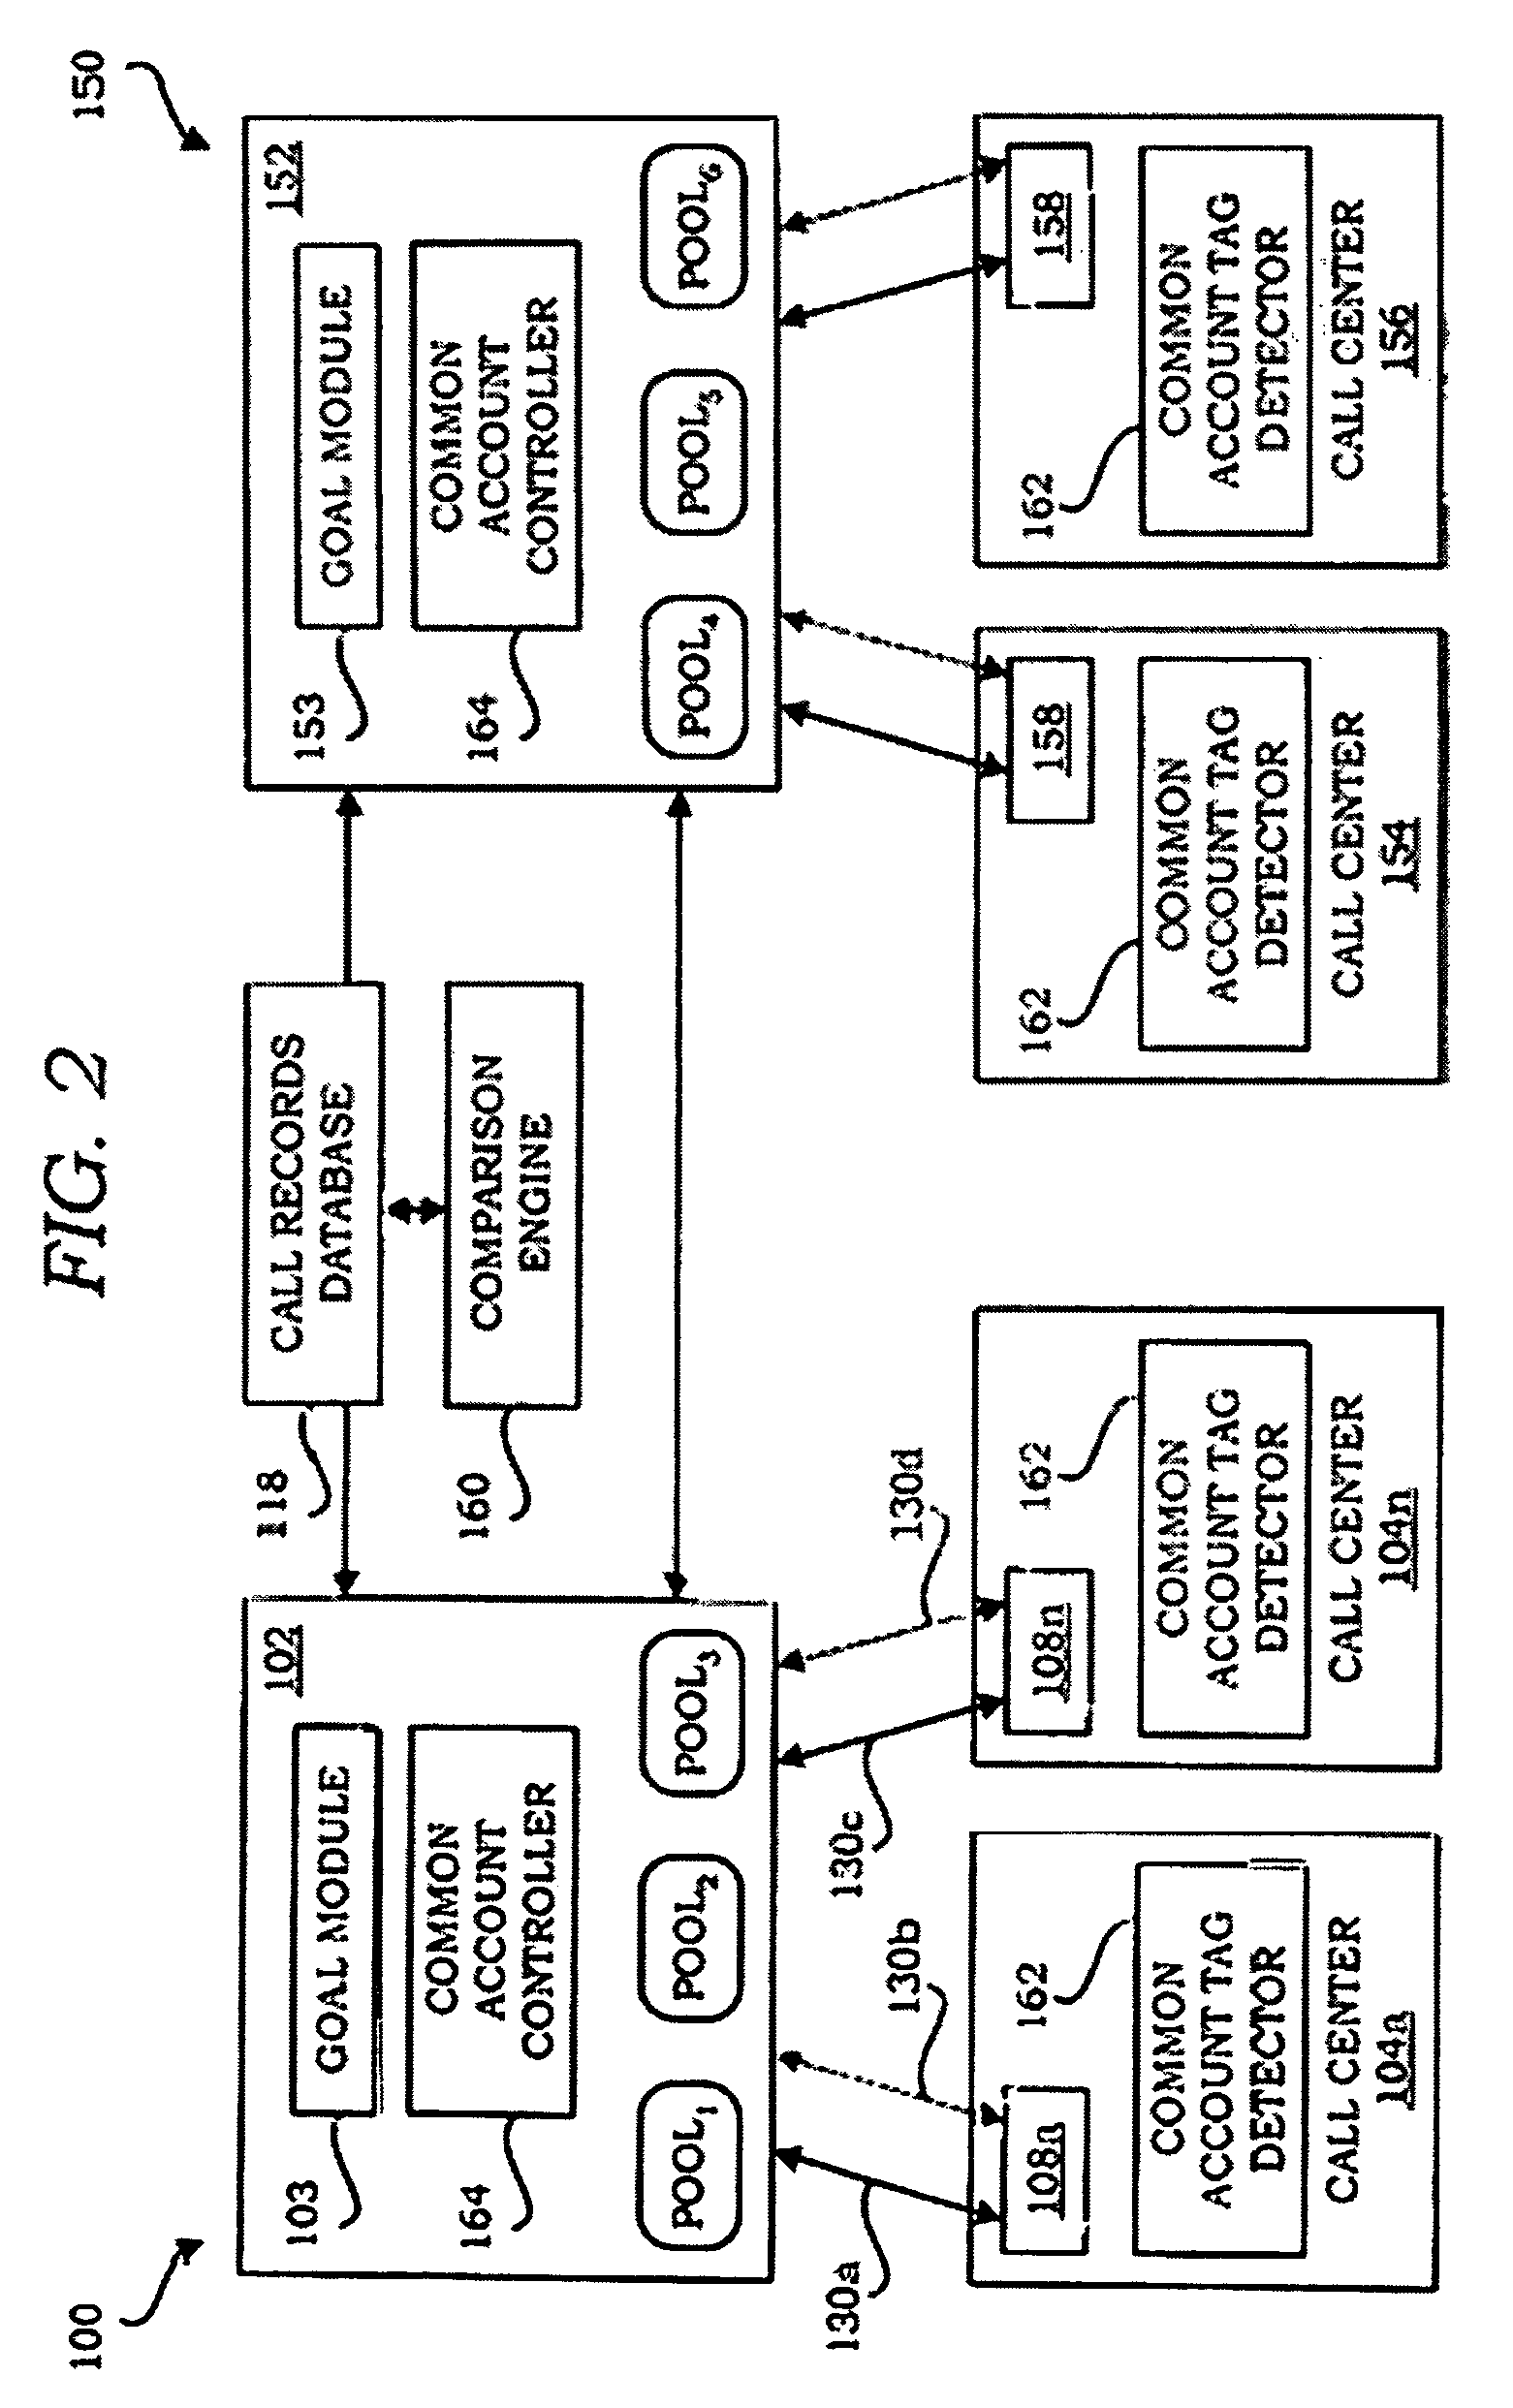 System and method for updating contact records